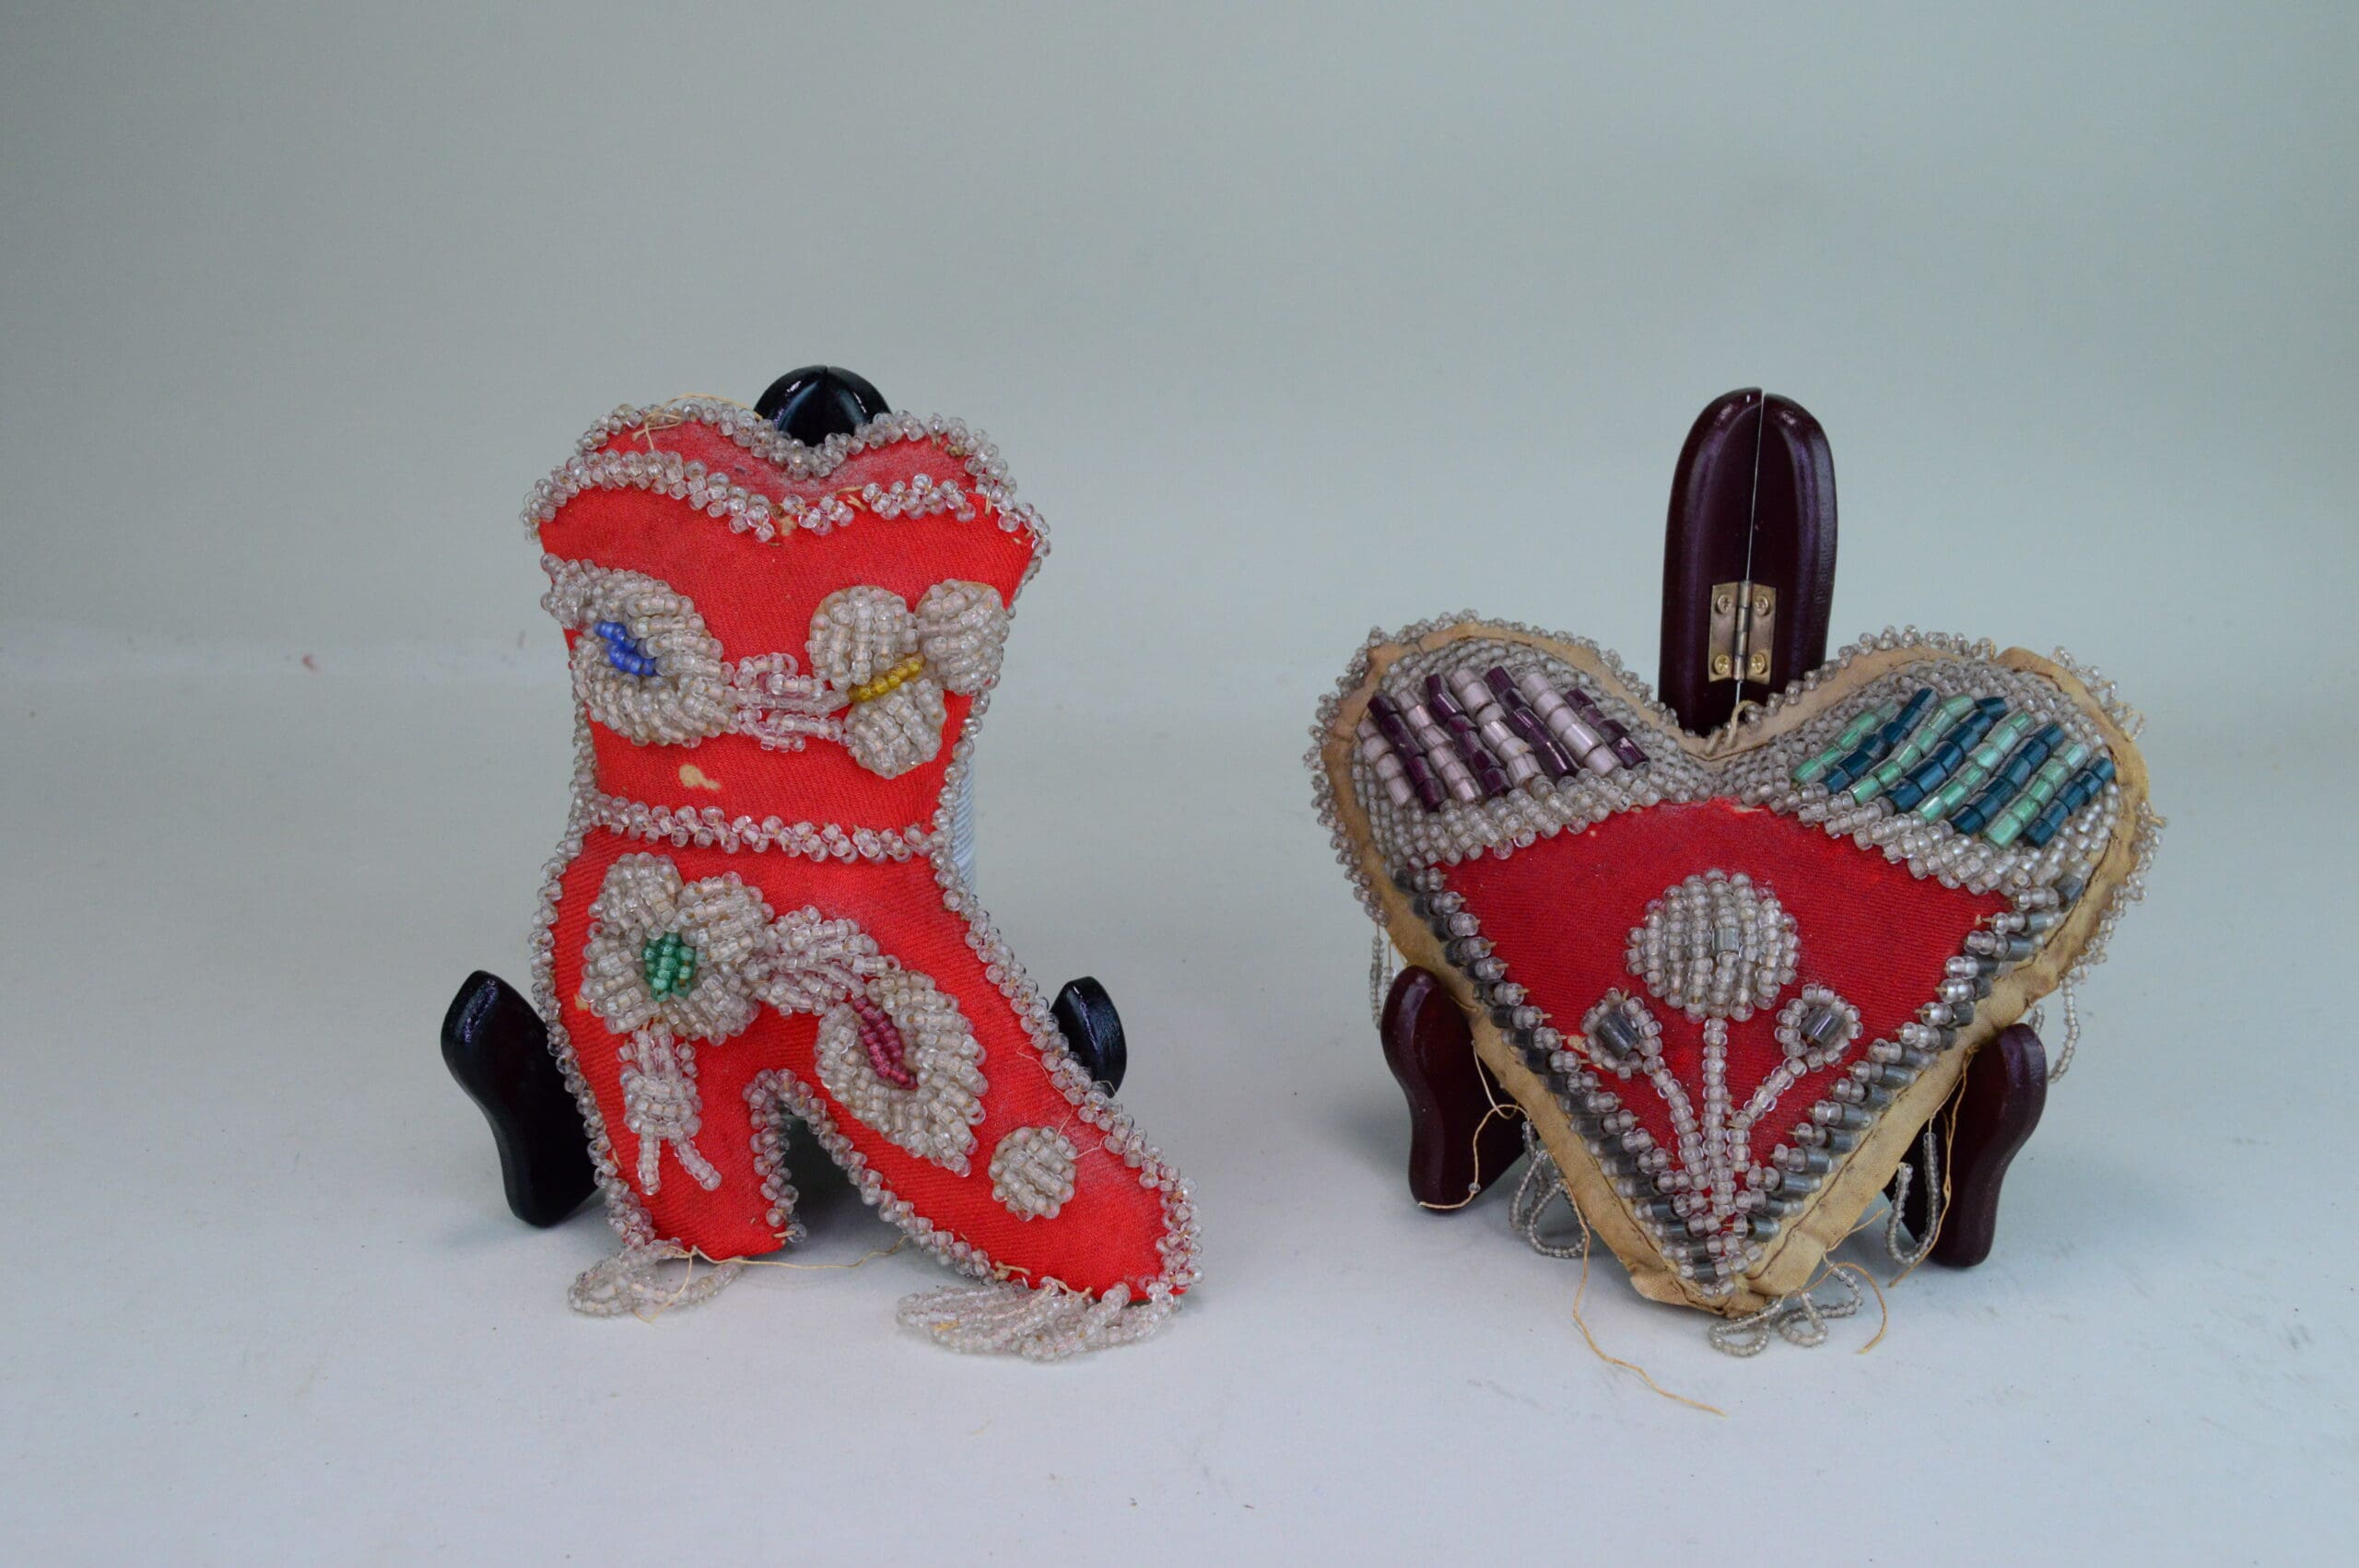 The Antique Beaded Pincushion Whimsy, heart shape and a ladies boot. from early 1900's